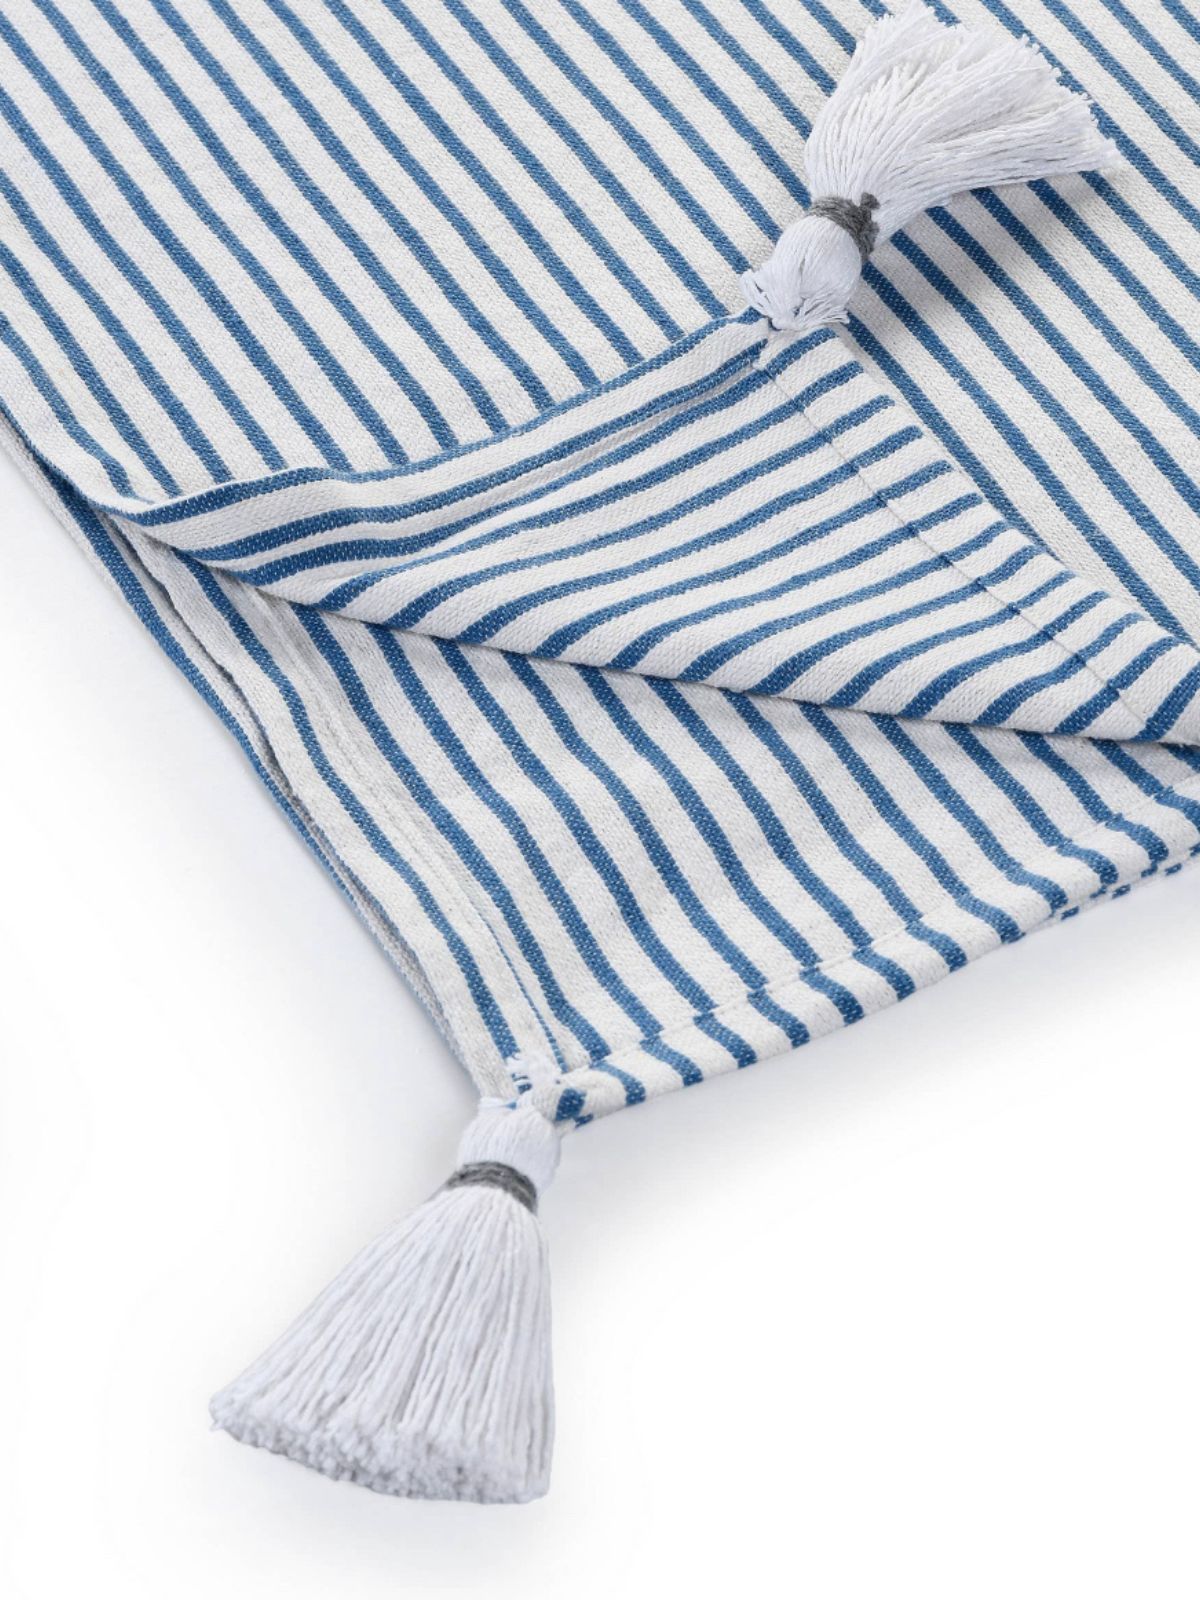 Blue and Ivory Striped 100% Cotton Decorative Throw Blanket with Tassels - KYA Home Decor, 50W x 60L. 